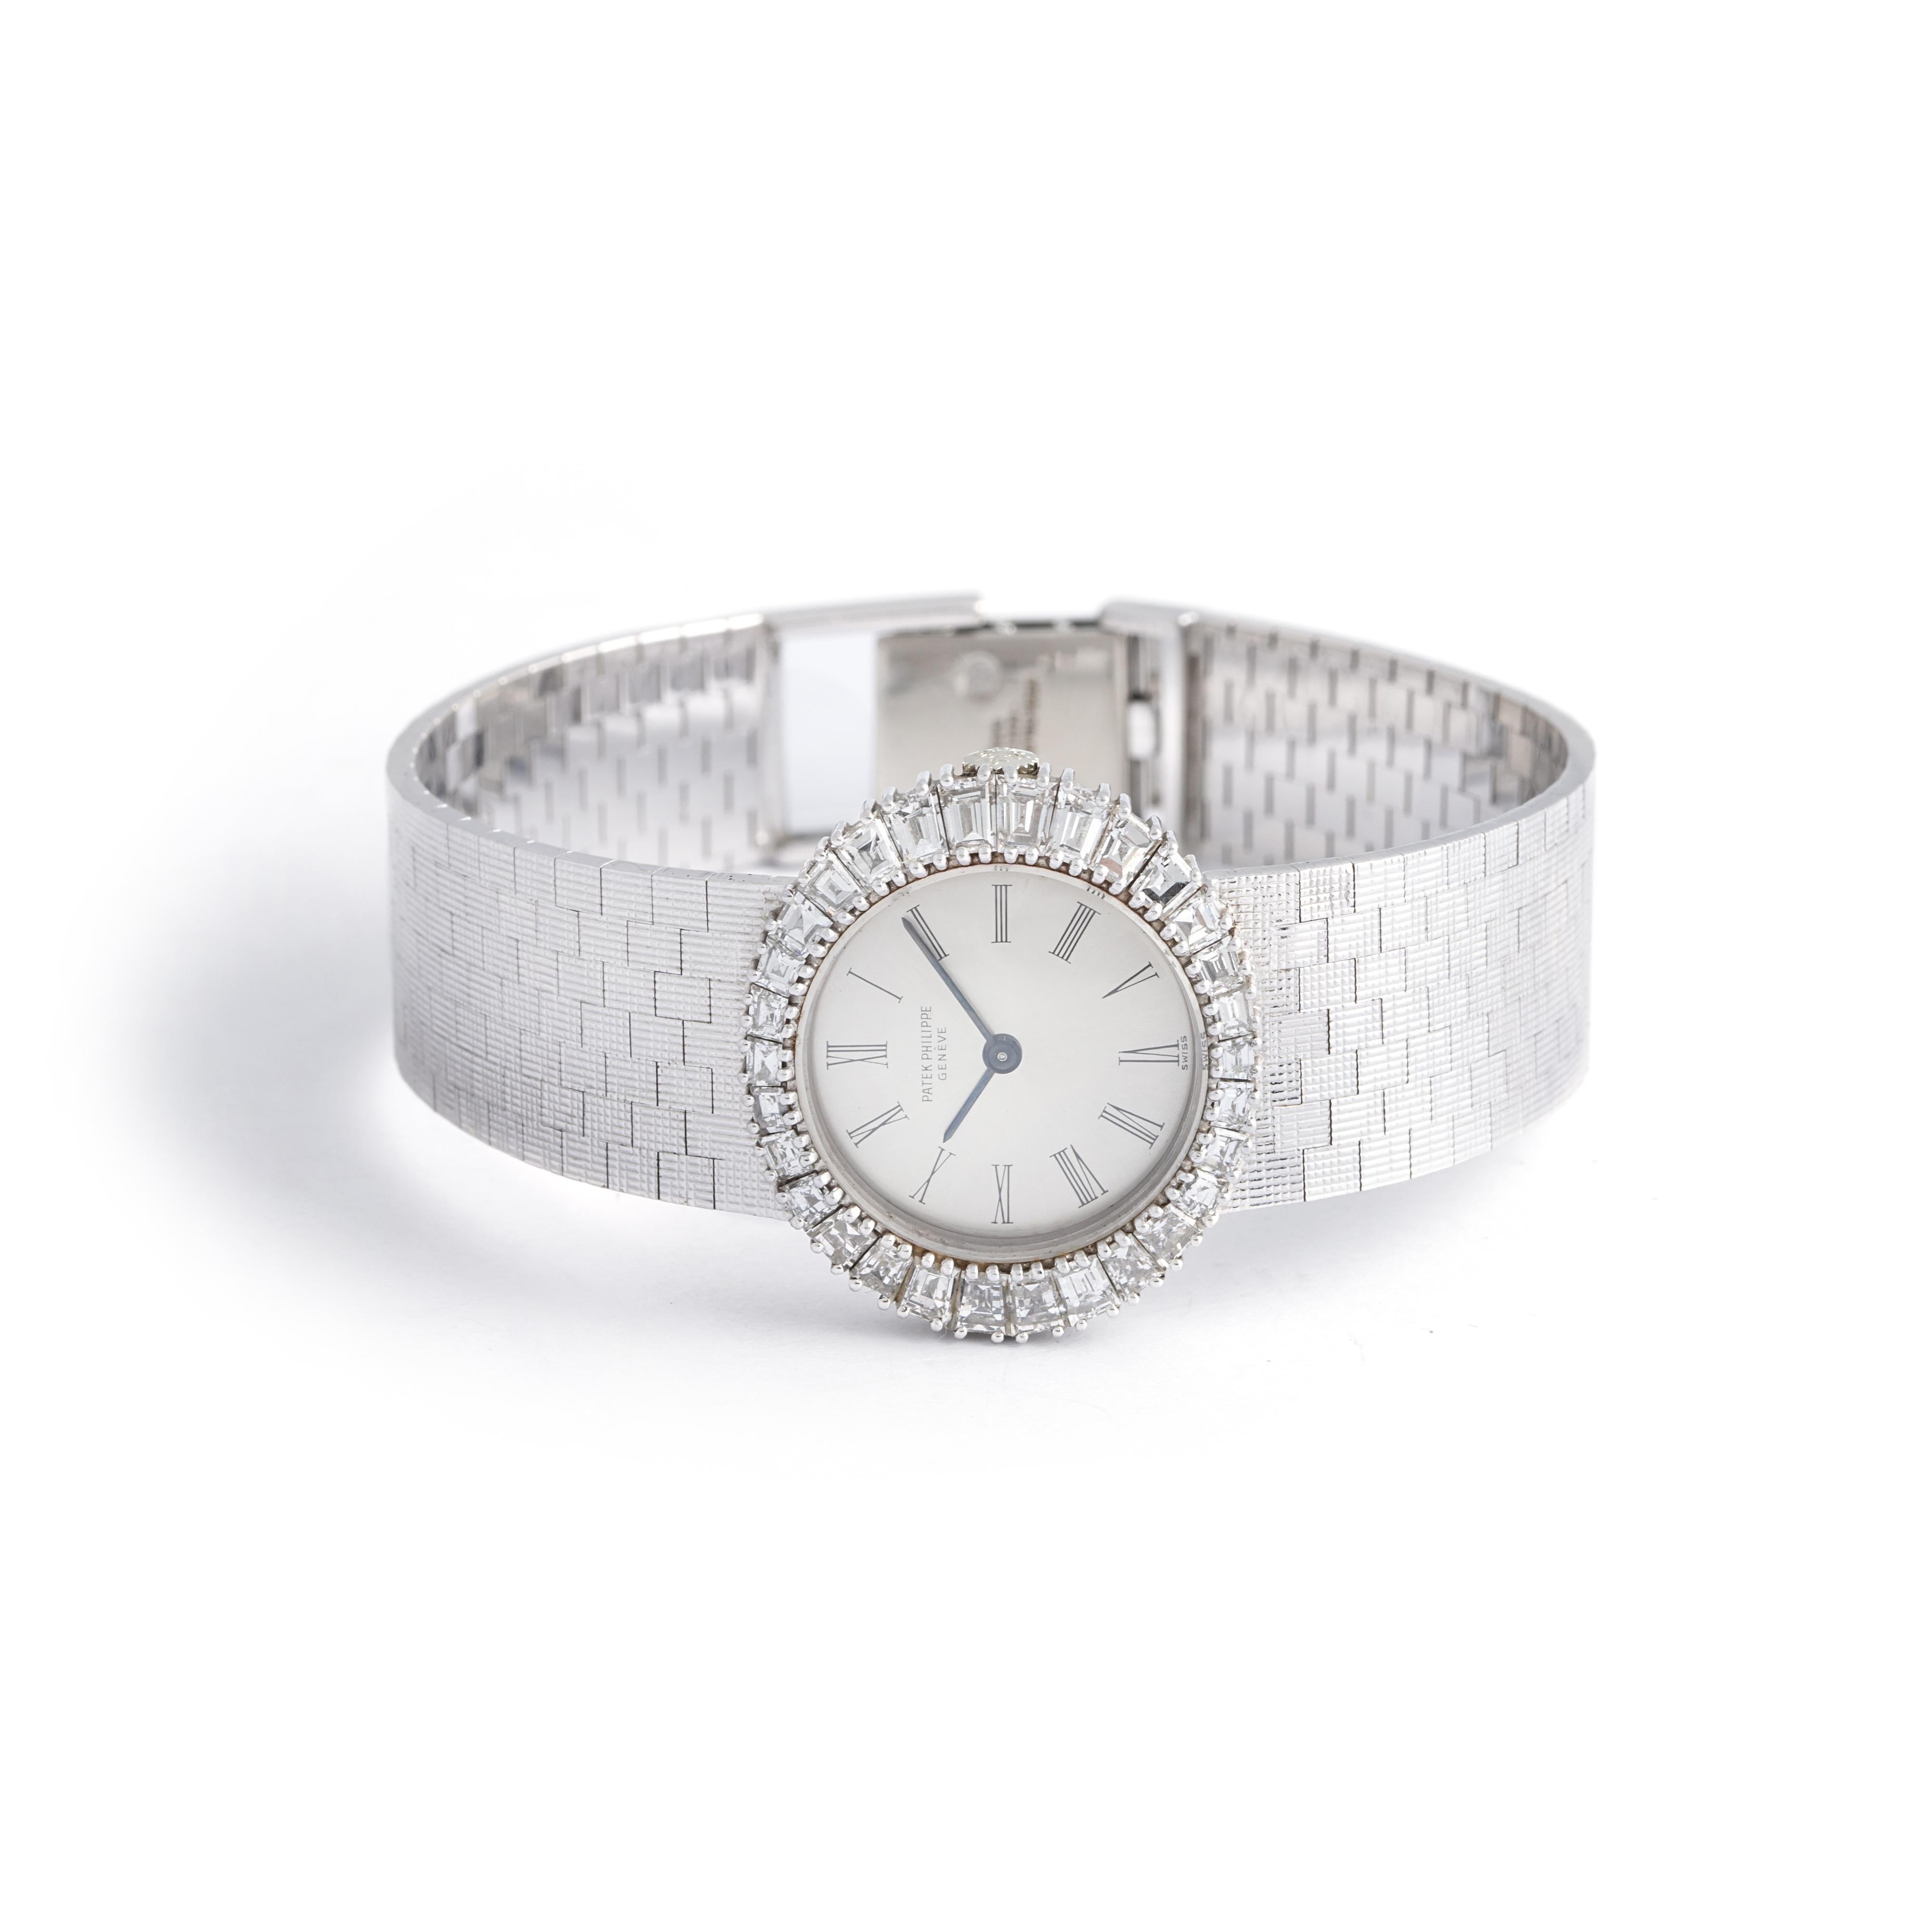 Patek Philippe Diamond White Gold wristwatch. Circa 1970.
Baguette cut diamond on 18K white gold.
Patek Philippe signed and numbered.
Swiss made. Patek Philippe pouch.
Dimensions case:  2.50cm x 2.30cm x 0.50cm
Length: approx. 18 centimeters.
Total